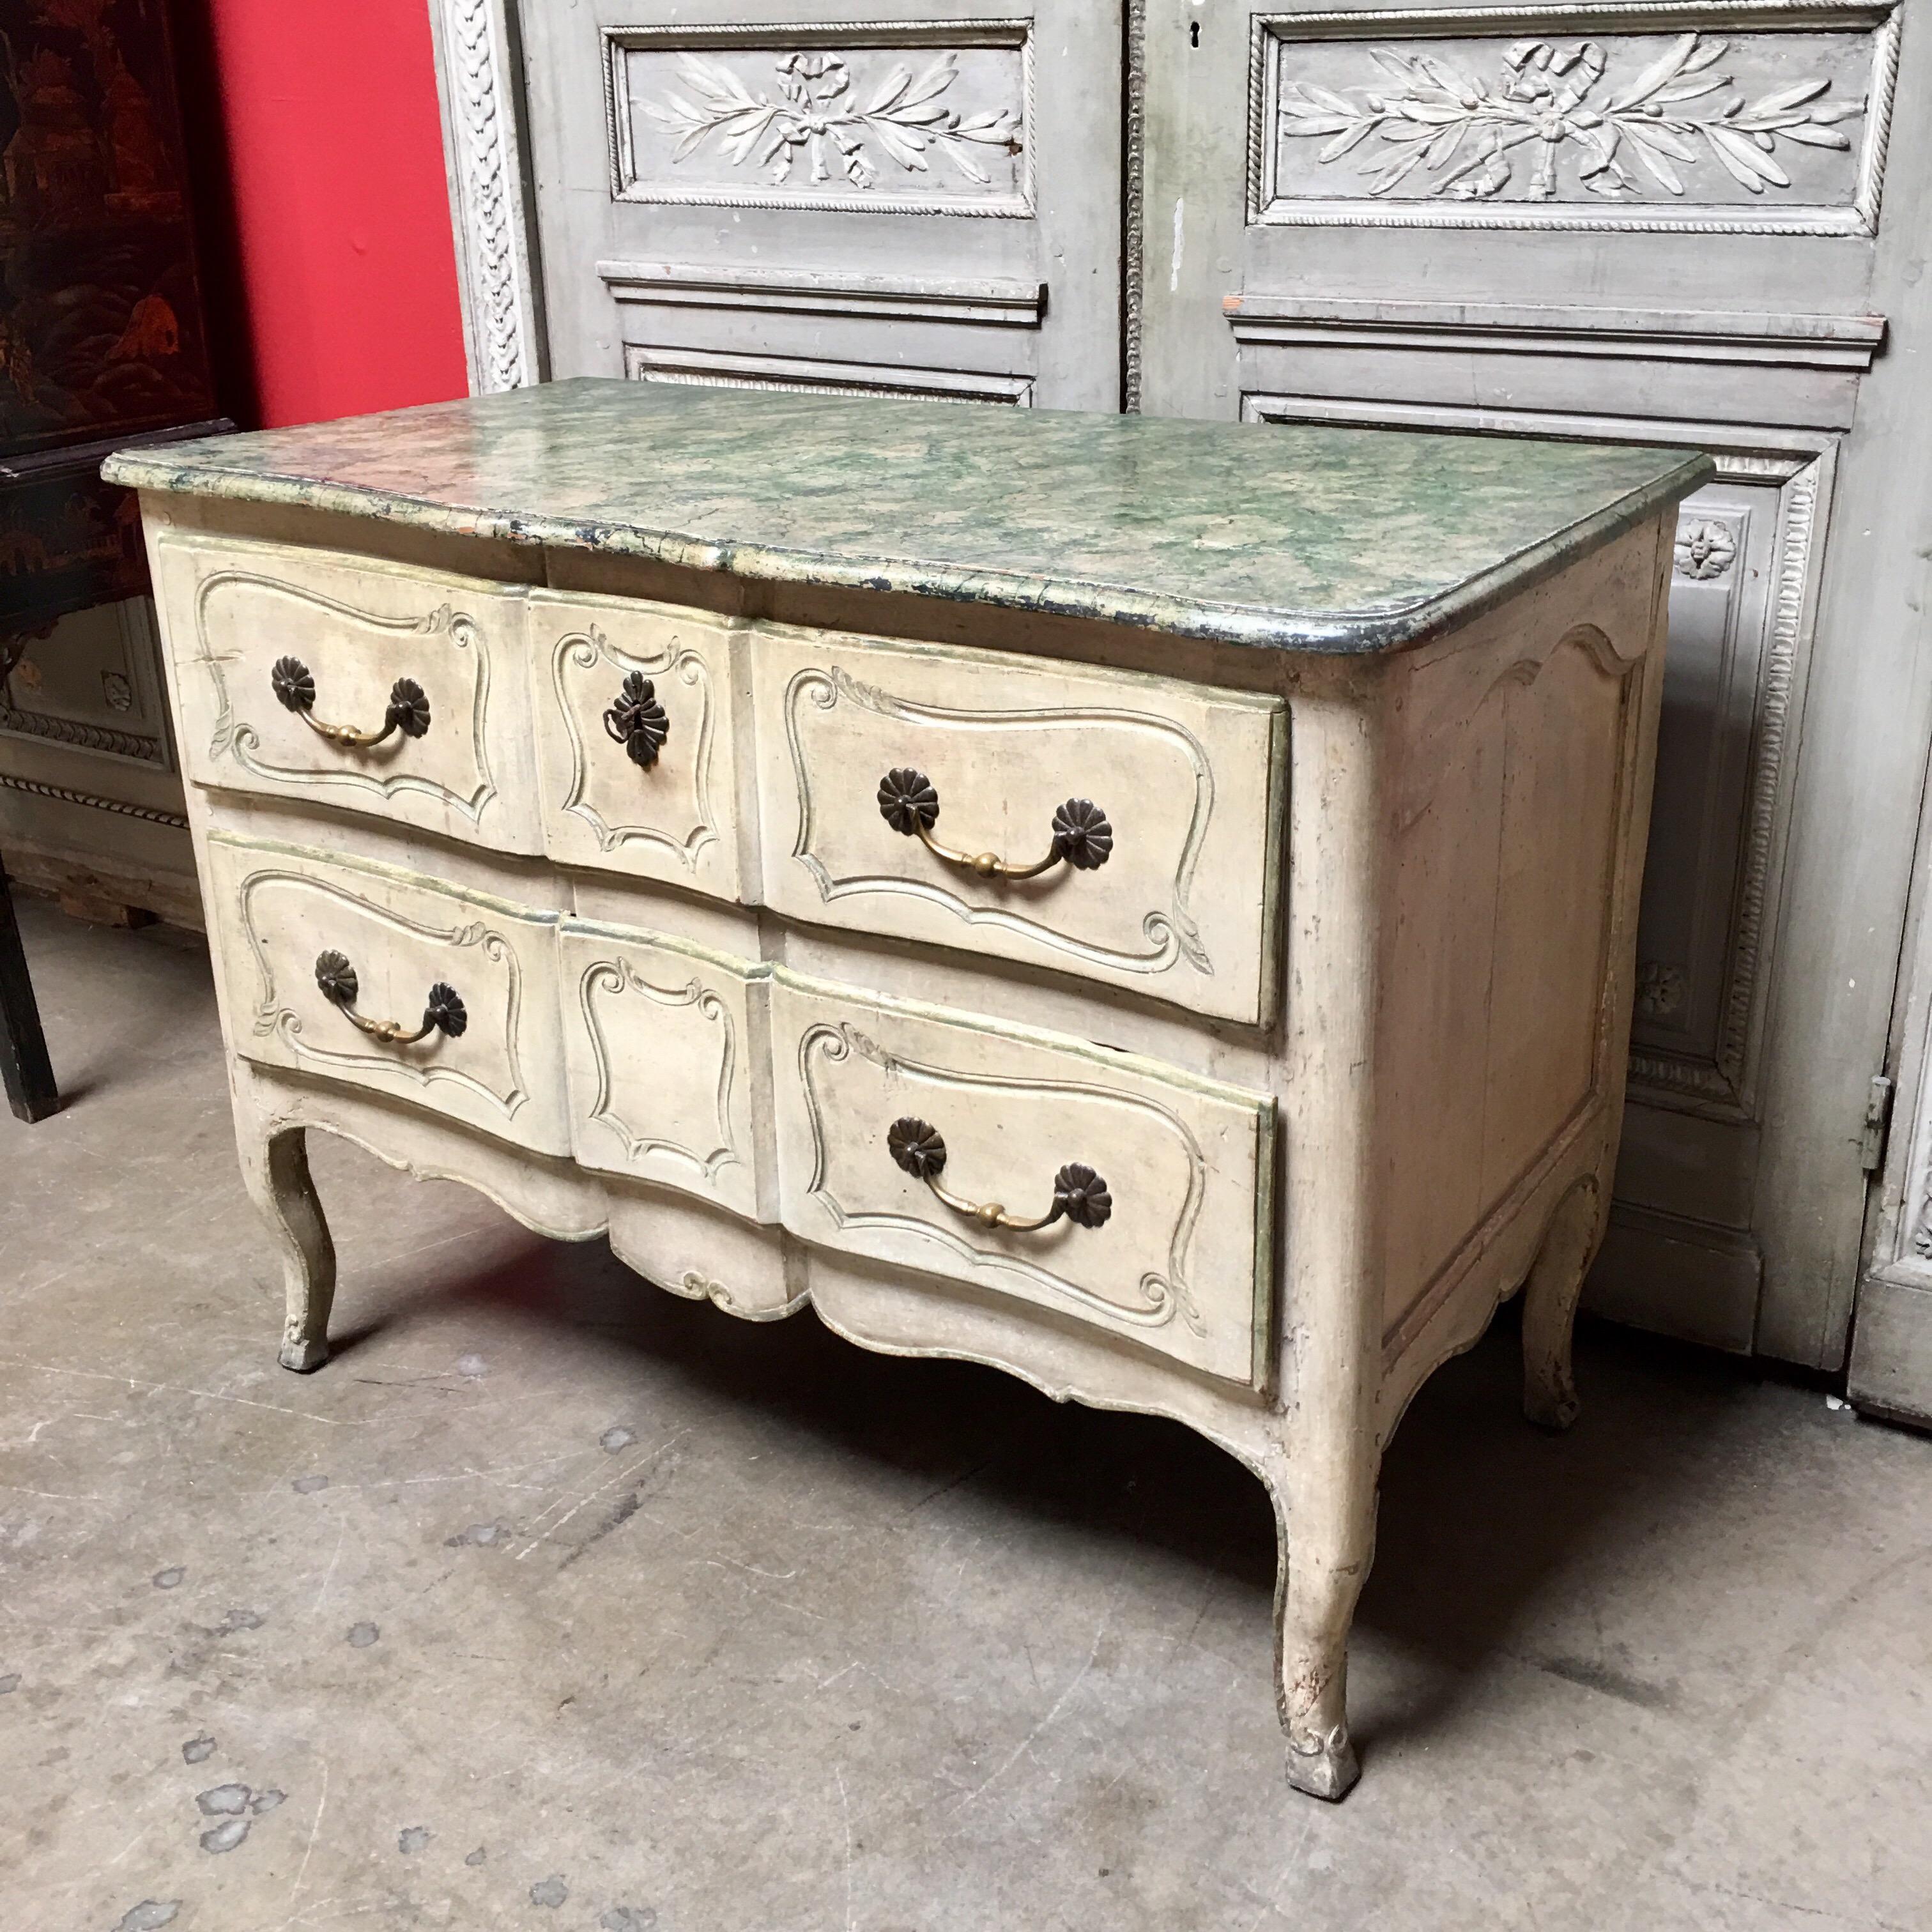 A French Louis XV 18th century painted commode with a faux painted marble top.